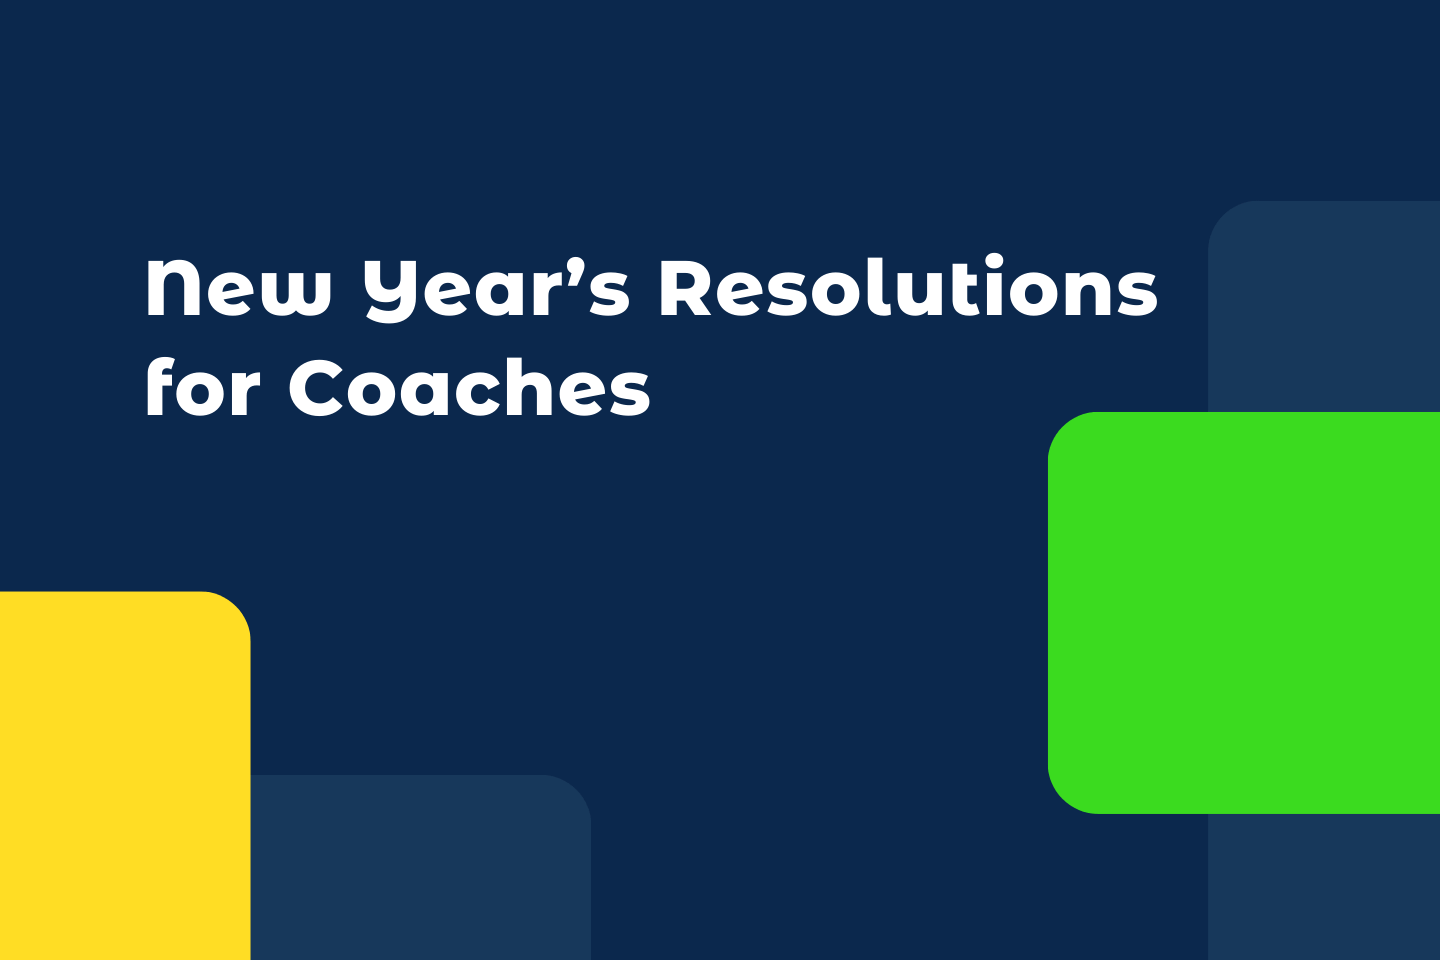 New Year’s Resolutions for coaches